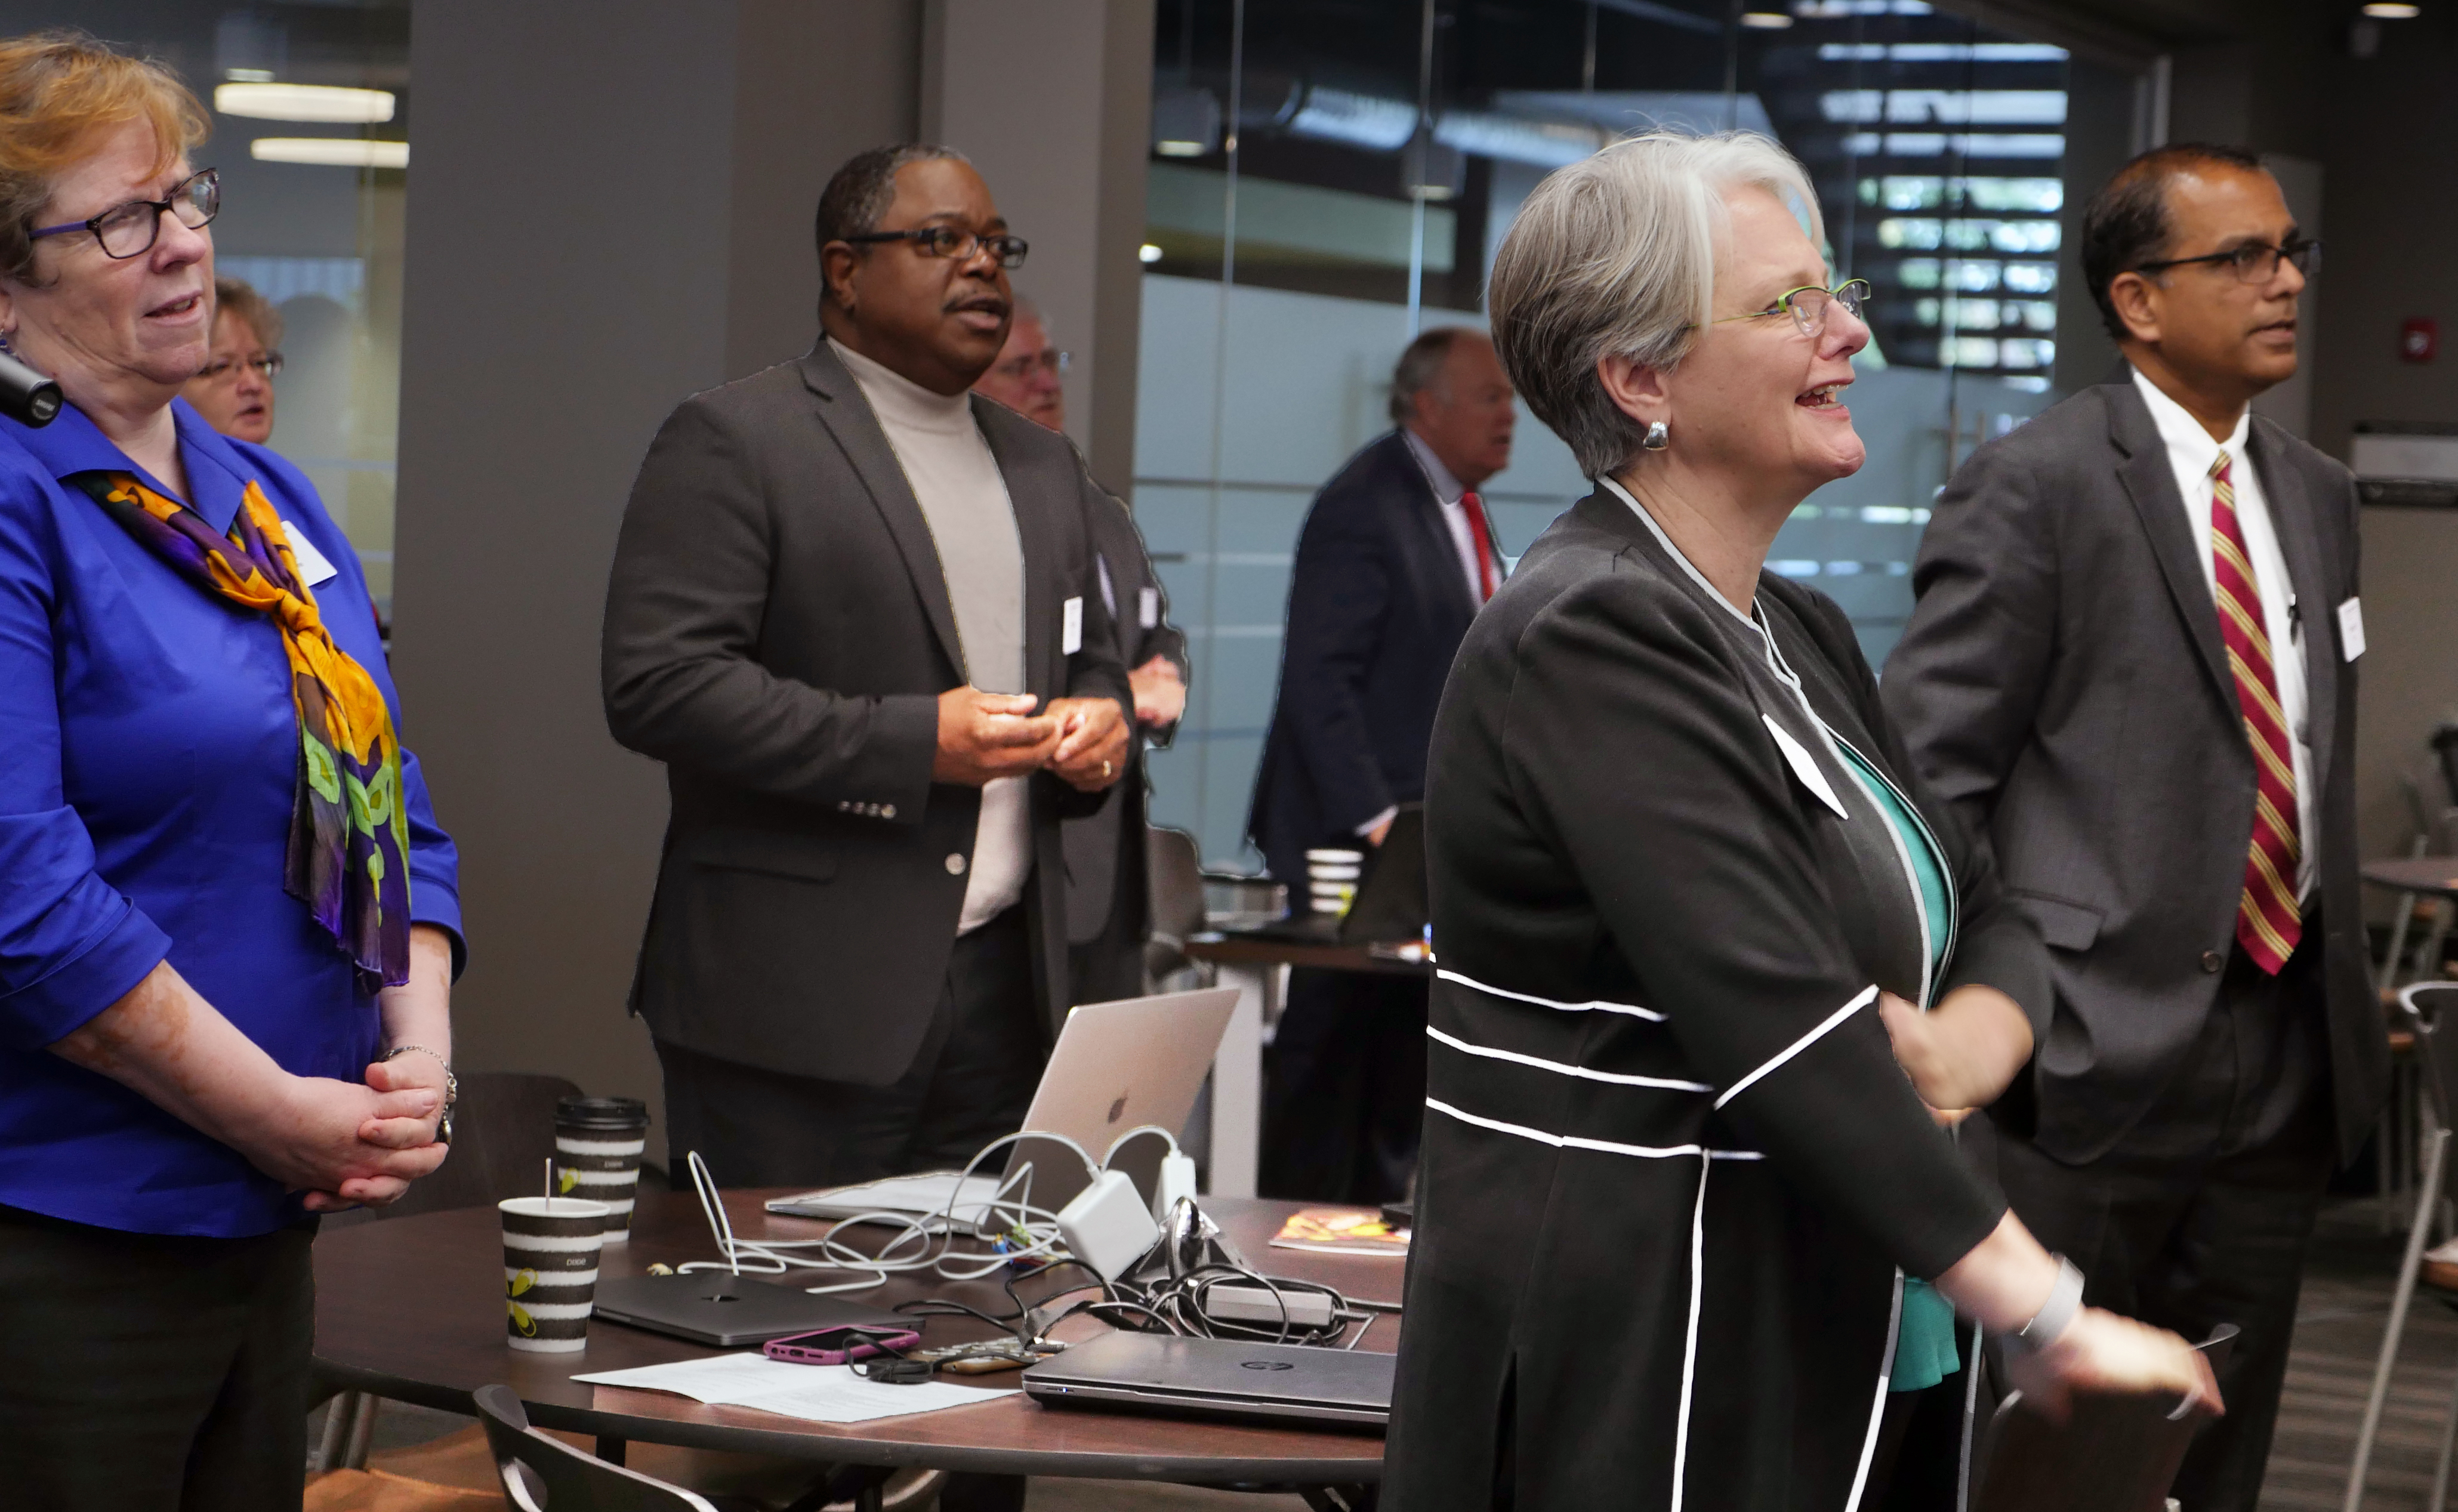 The Rev. Sandra Olewine, Reggie Clemons, Kathryn Croskery Jones and Vasanth Victor (from left) join in worship at the General Council on Finance and Administration board meeting in November in Nashville, Tenn. Photo by Heather Hahn, UMNS